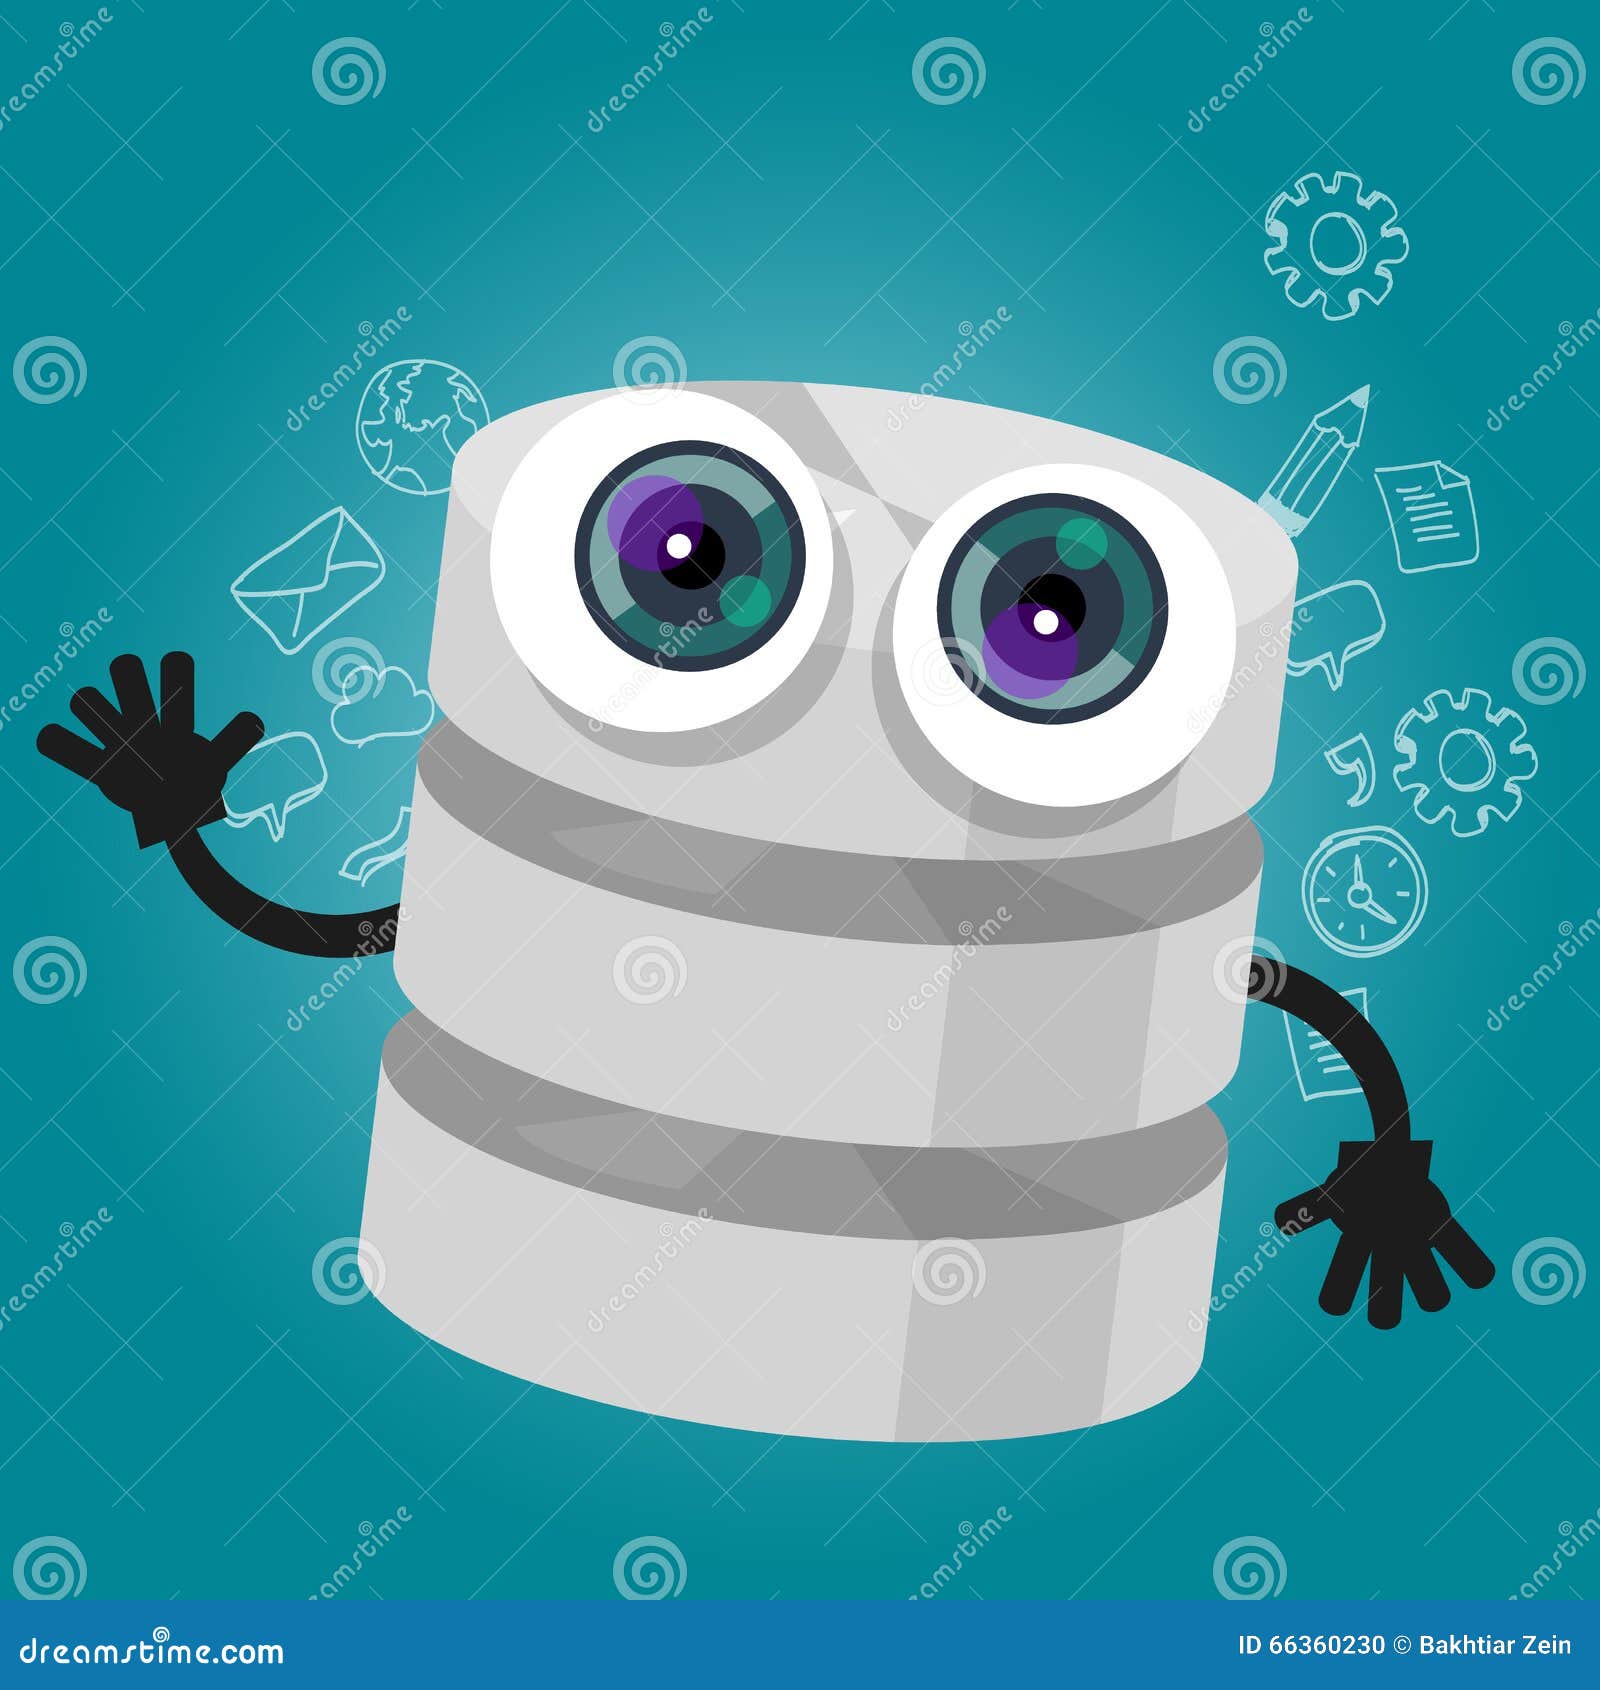 Database Big Data Storage Cartoon Hands Eyes Mascot Cute Funny Smile Tech  Object Vector Stock Vector - Illustration of computer, character: 66360230